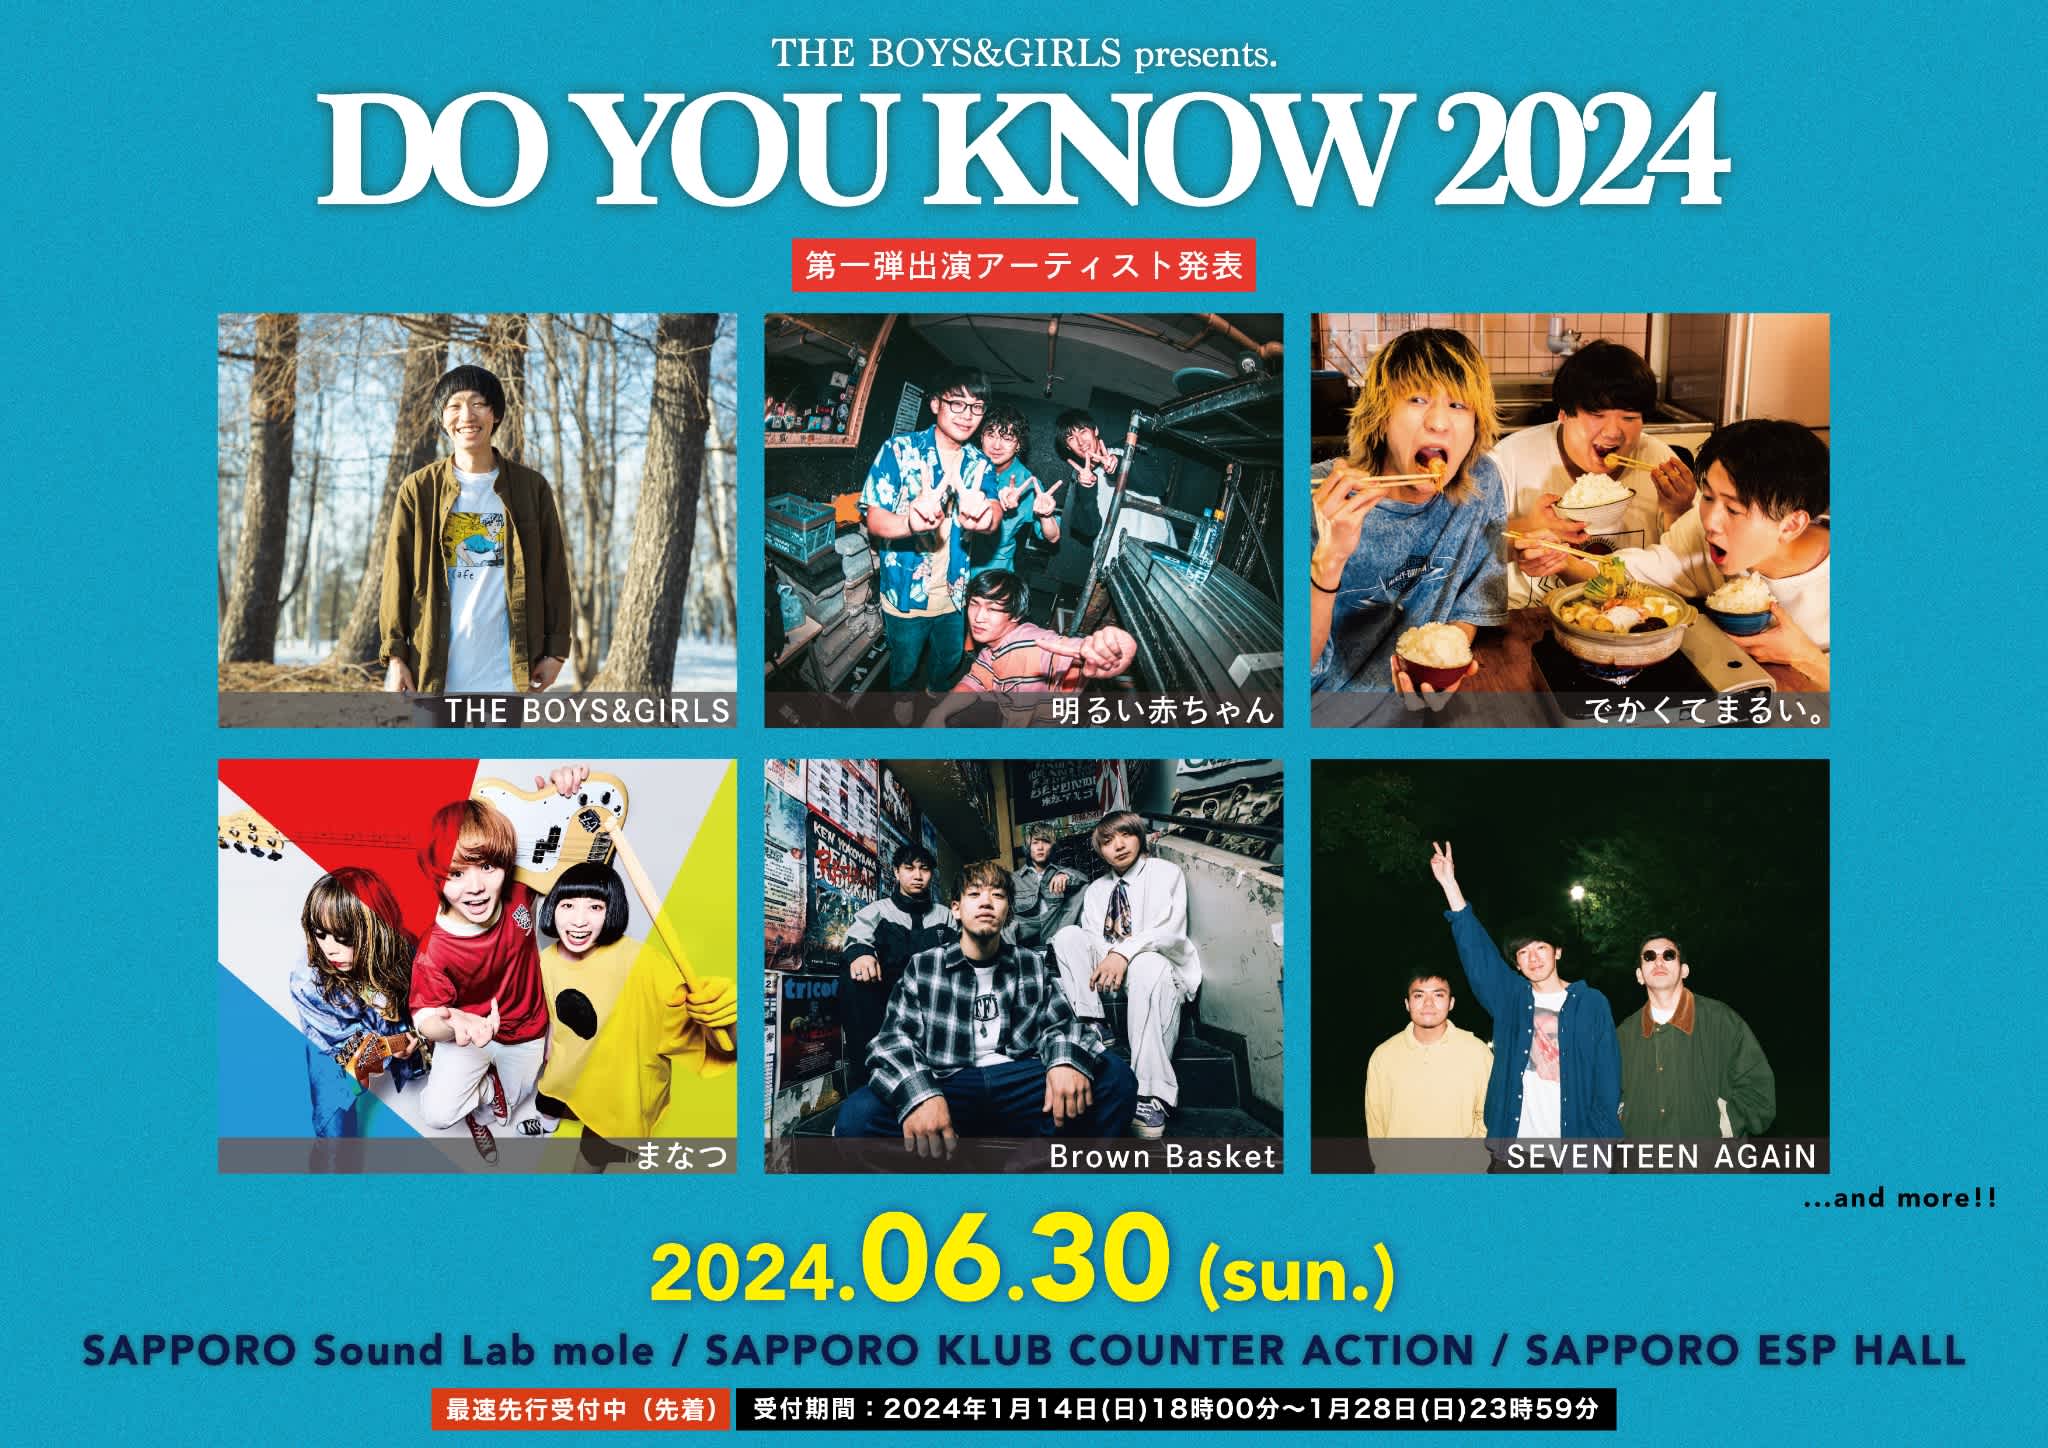 THE BOYS&GIRLS pre. "DO YOU KNOW 2024"のイメージ2